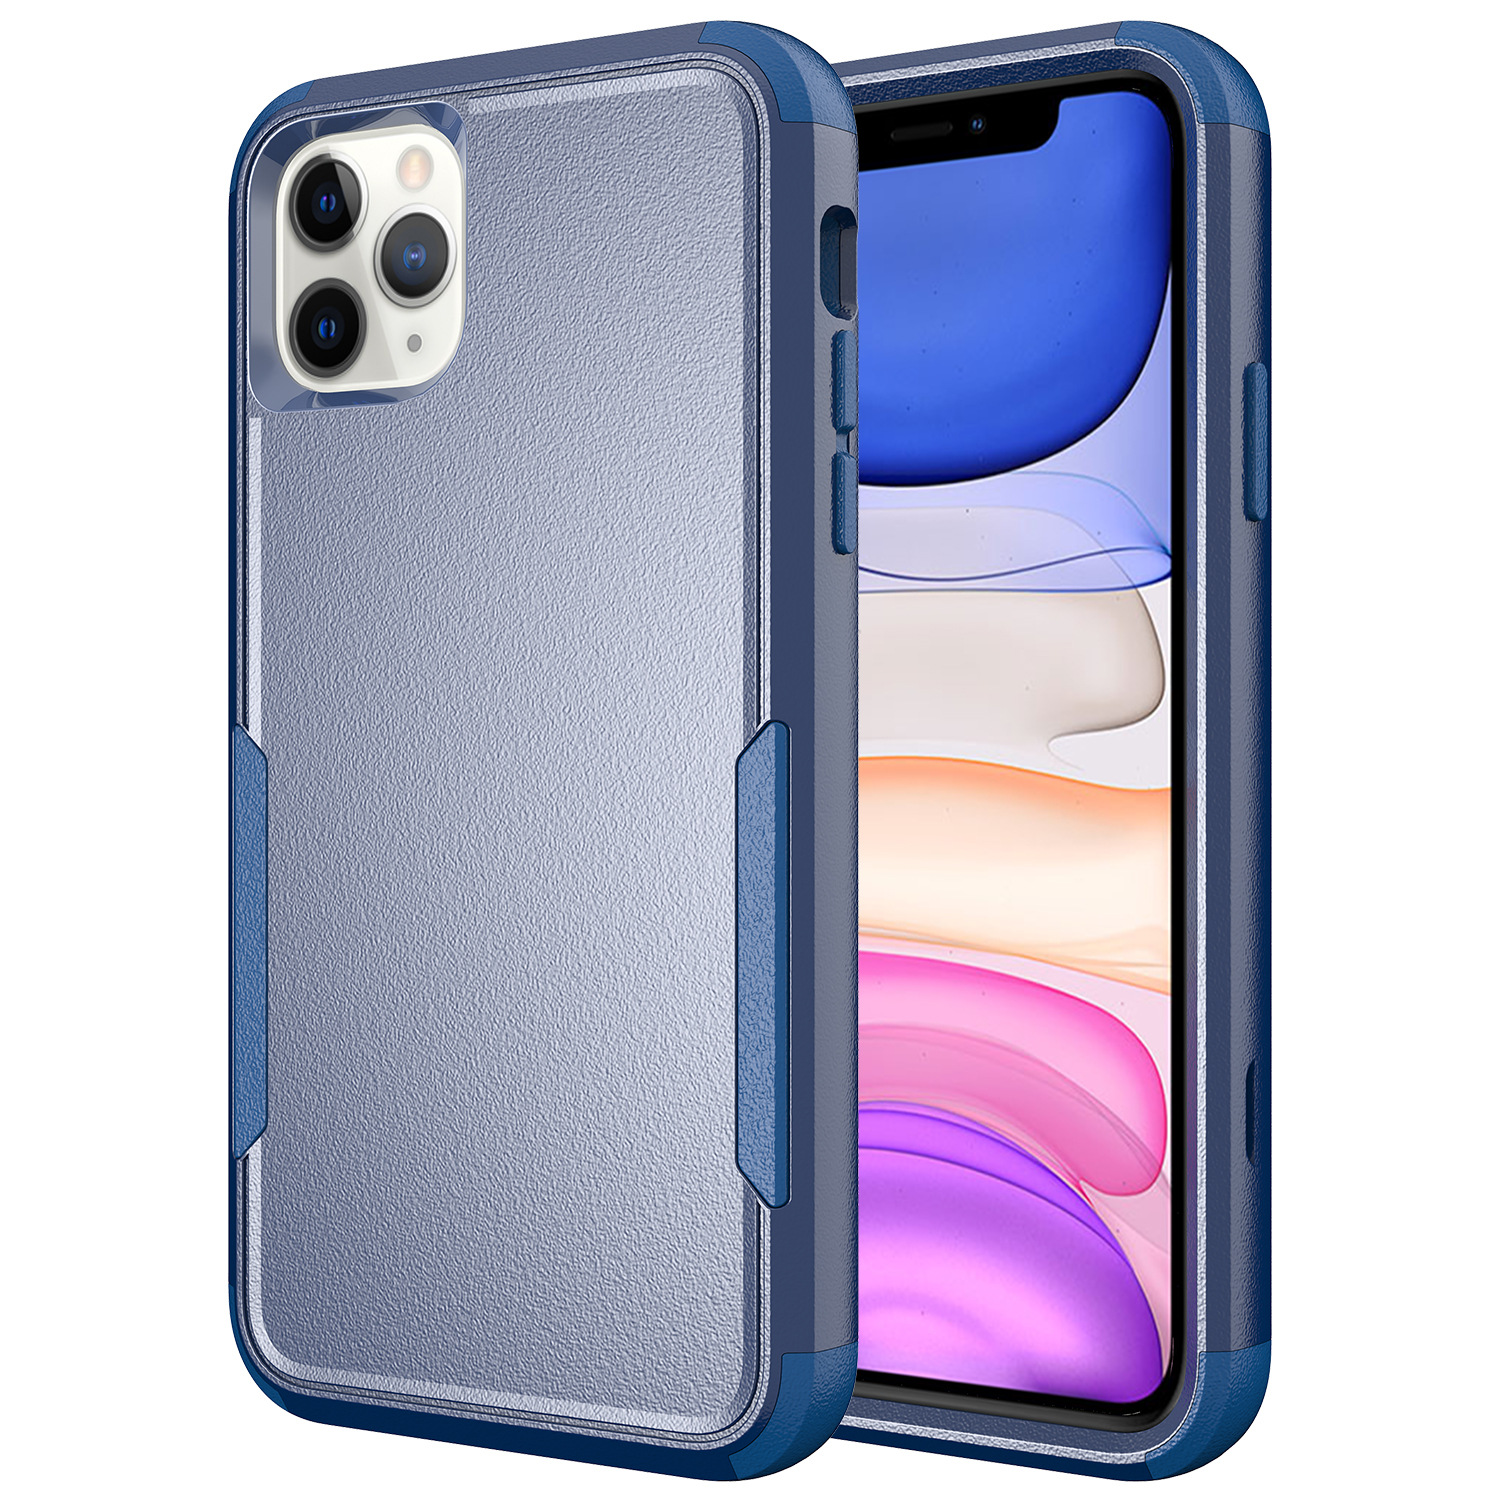 Heavy Duty Strong Armor Hybrid Case Cover for Apple iPHONE 12 / 12 Pro 6.1 (Navy Blue)